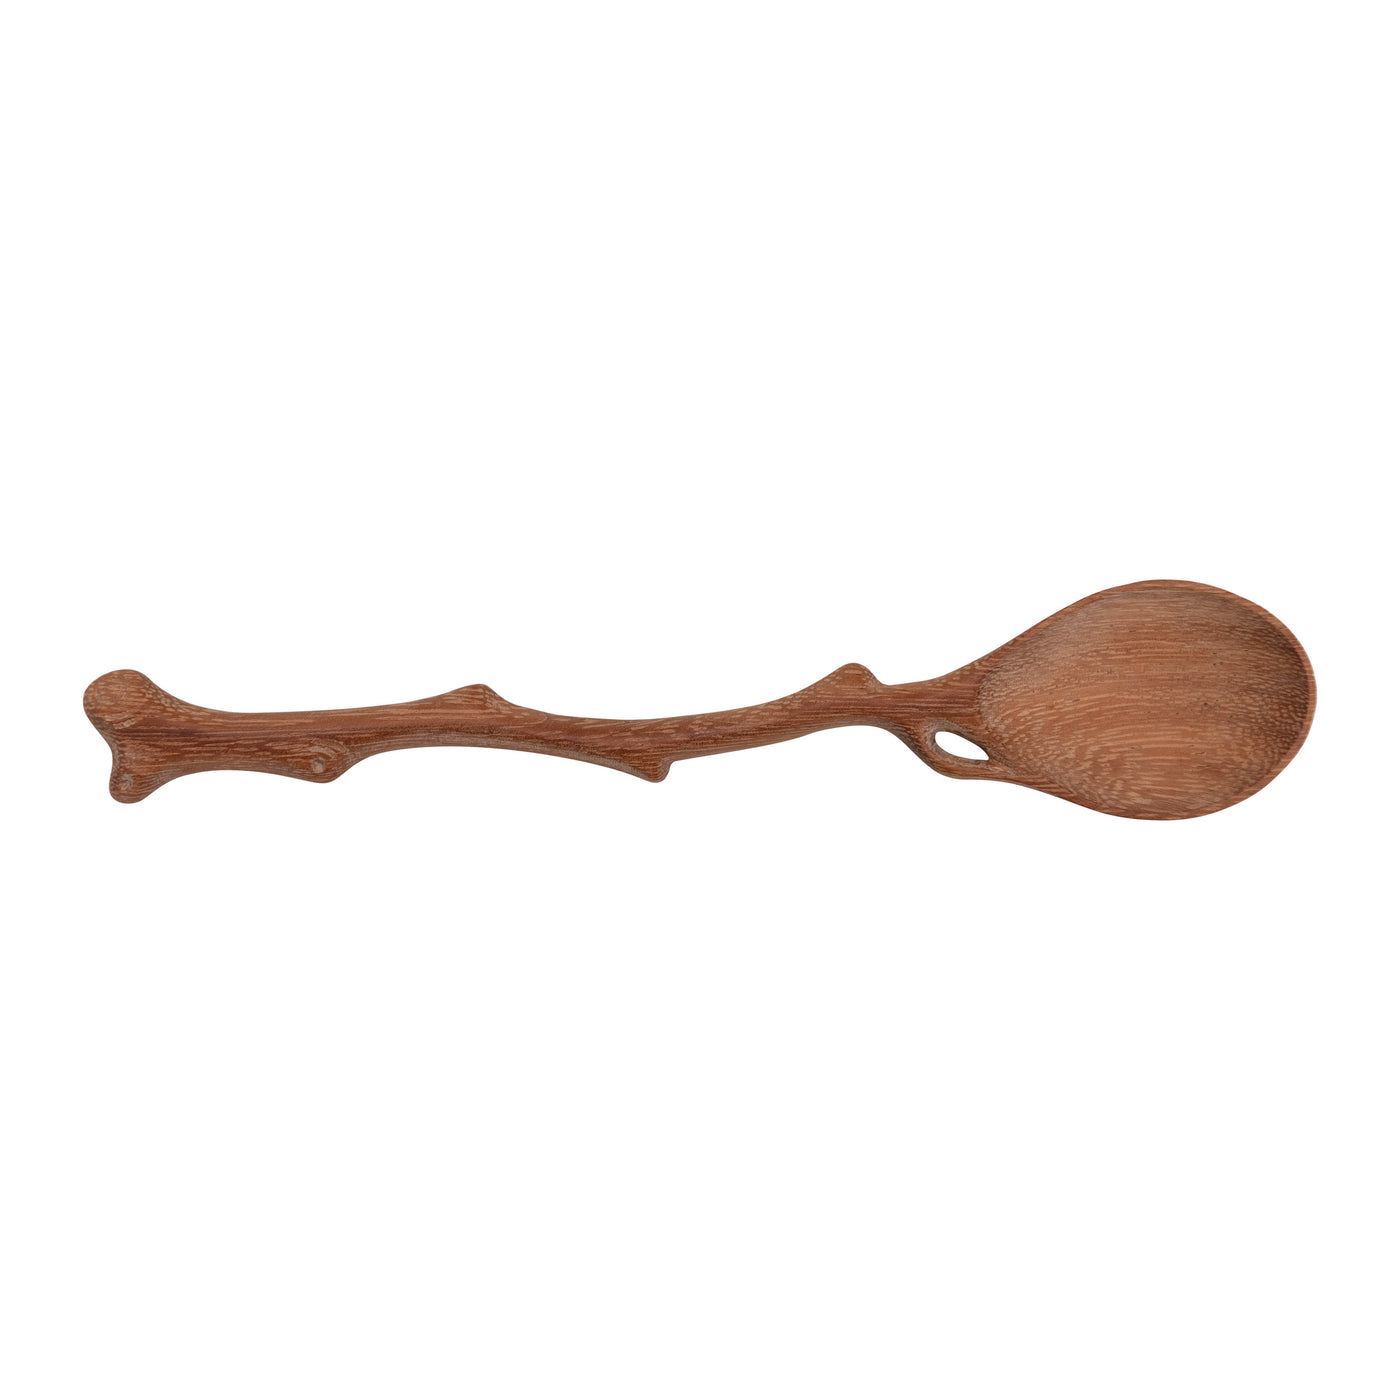 Hand-Carved Doussie Wood Spoon with Twig Shaped Handle